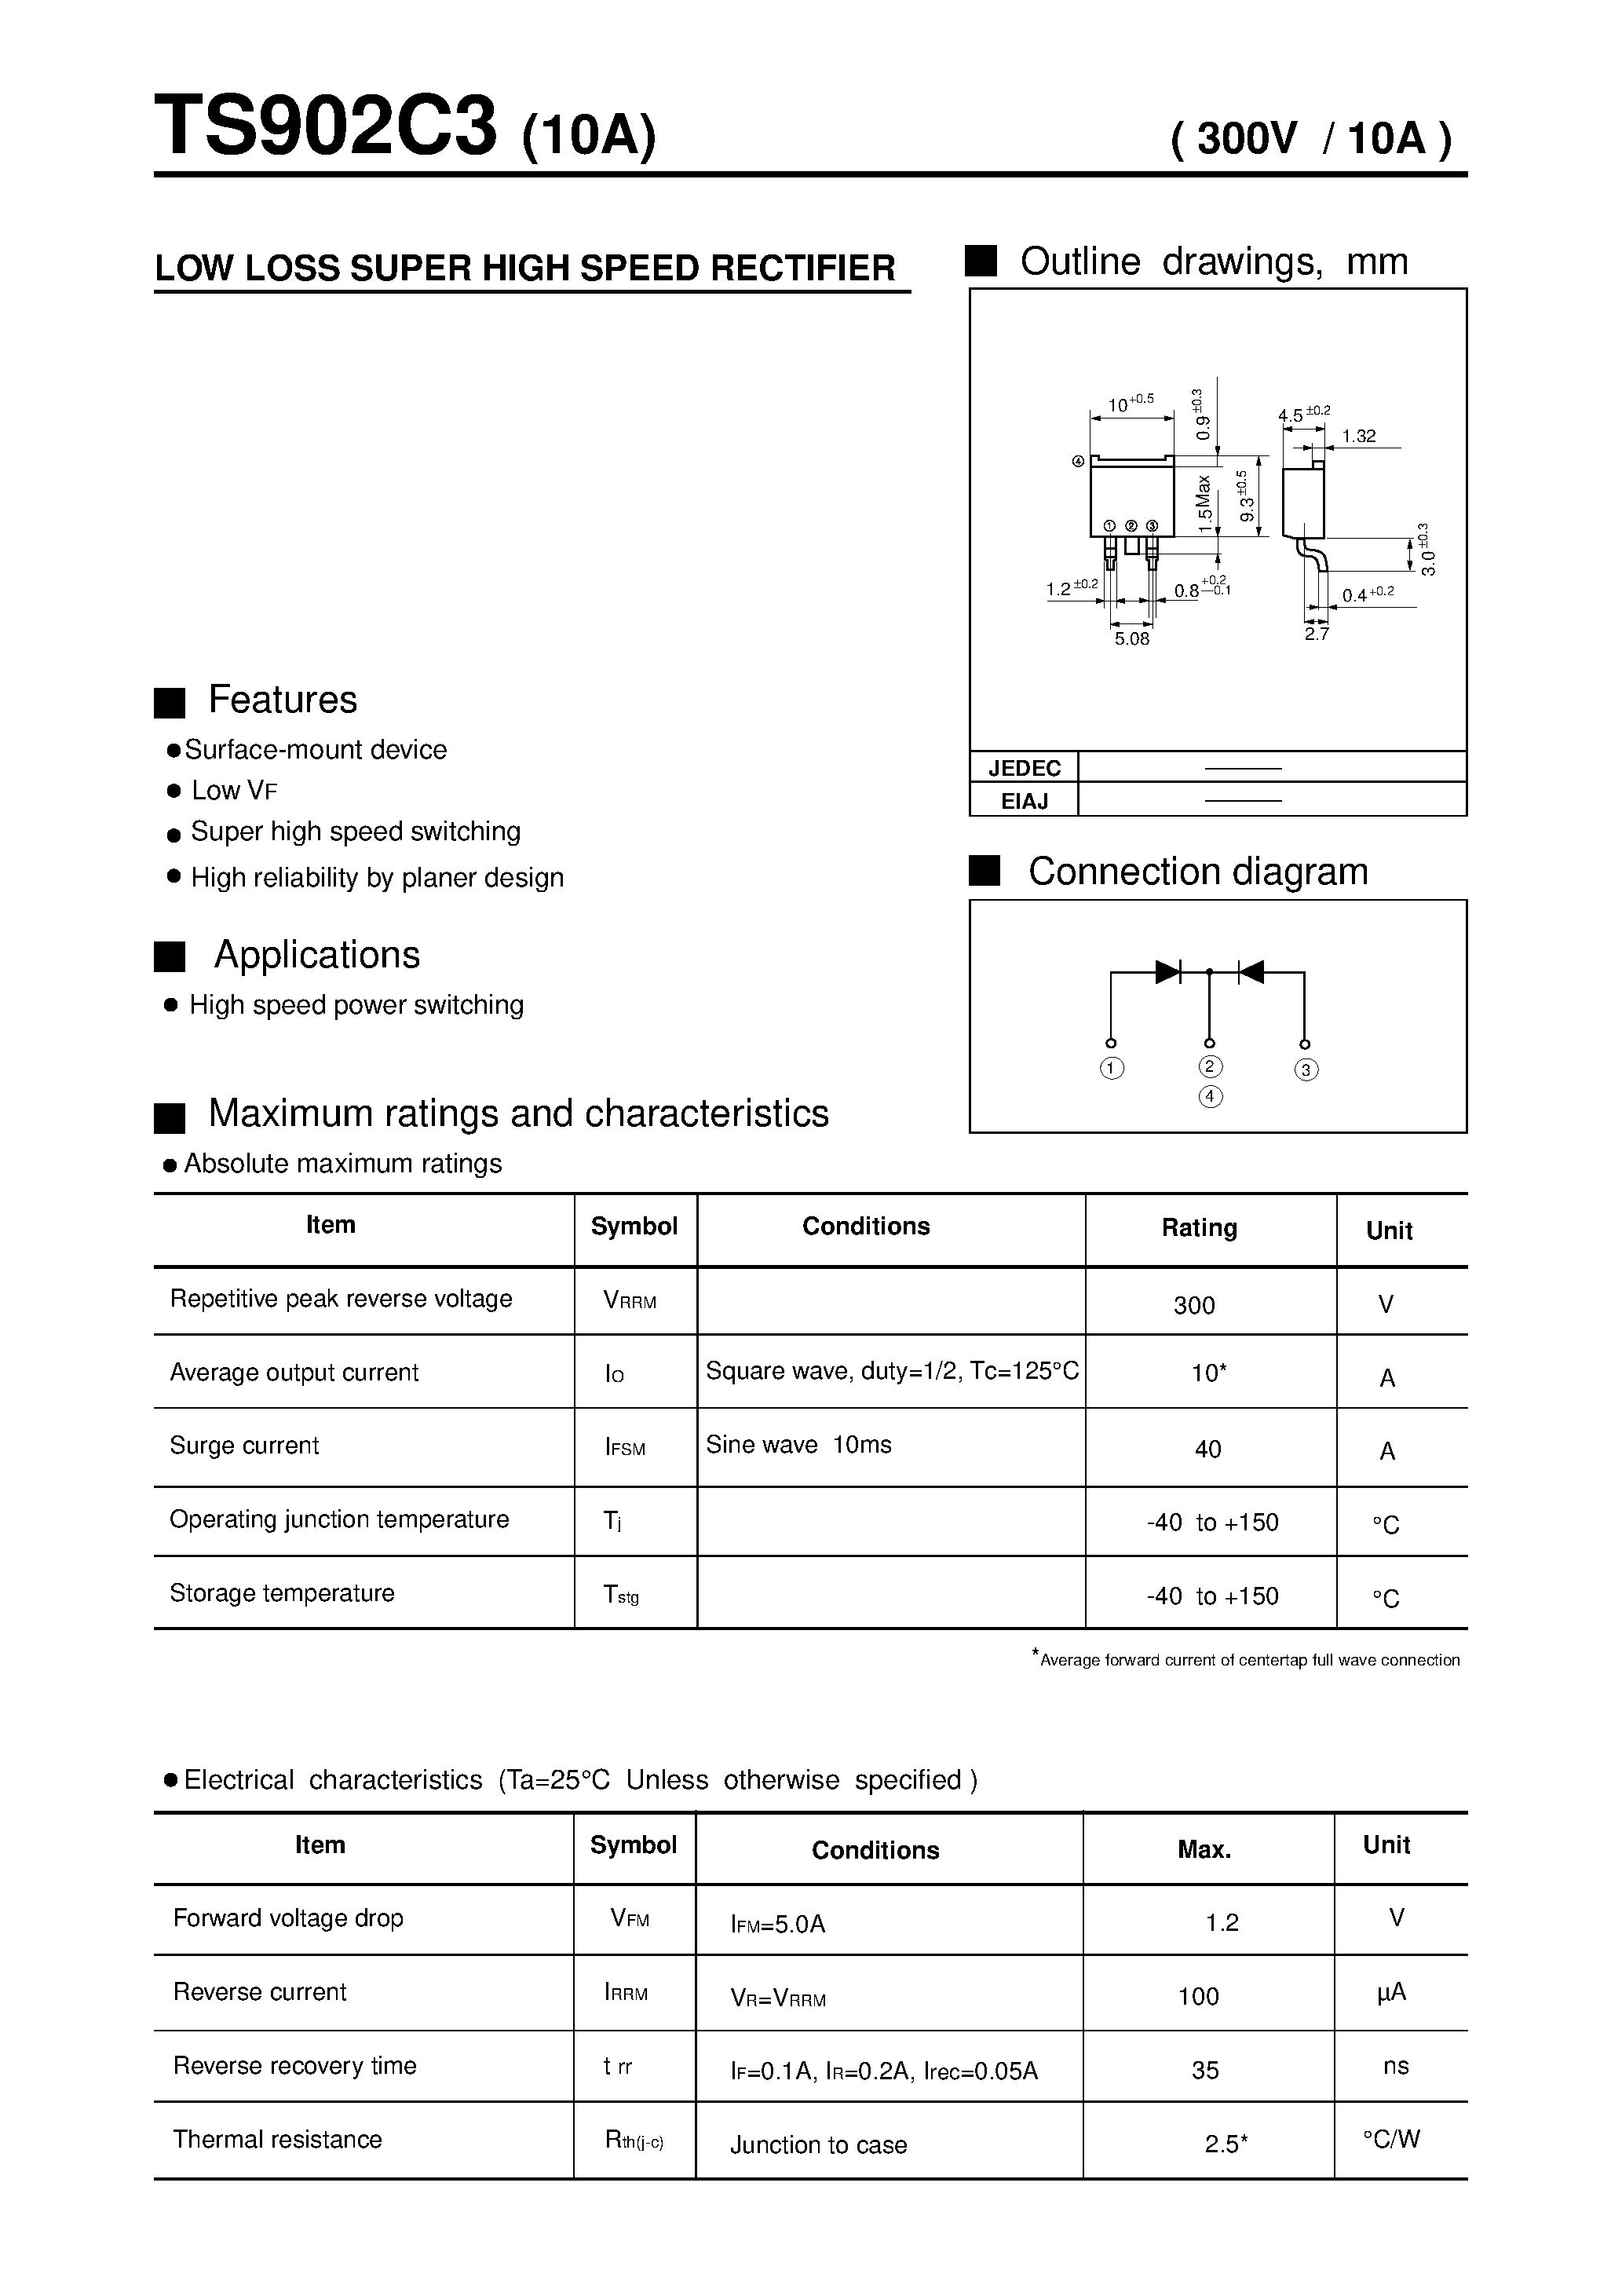 Datasheet TS902C3 - LOW LOSS SUPER HIGH SPEED RECTIFIER page 1